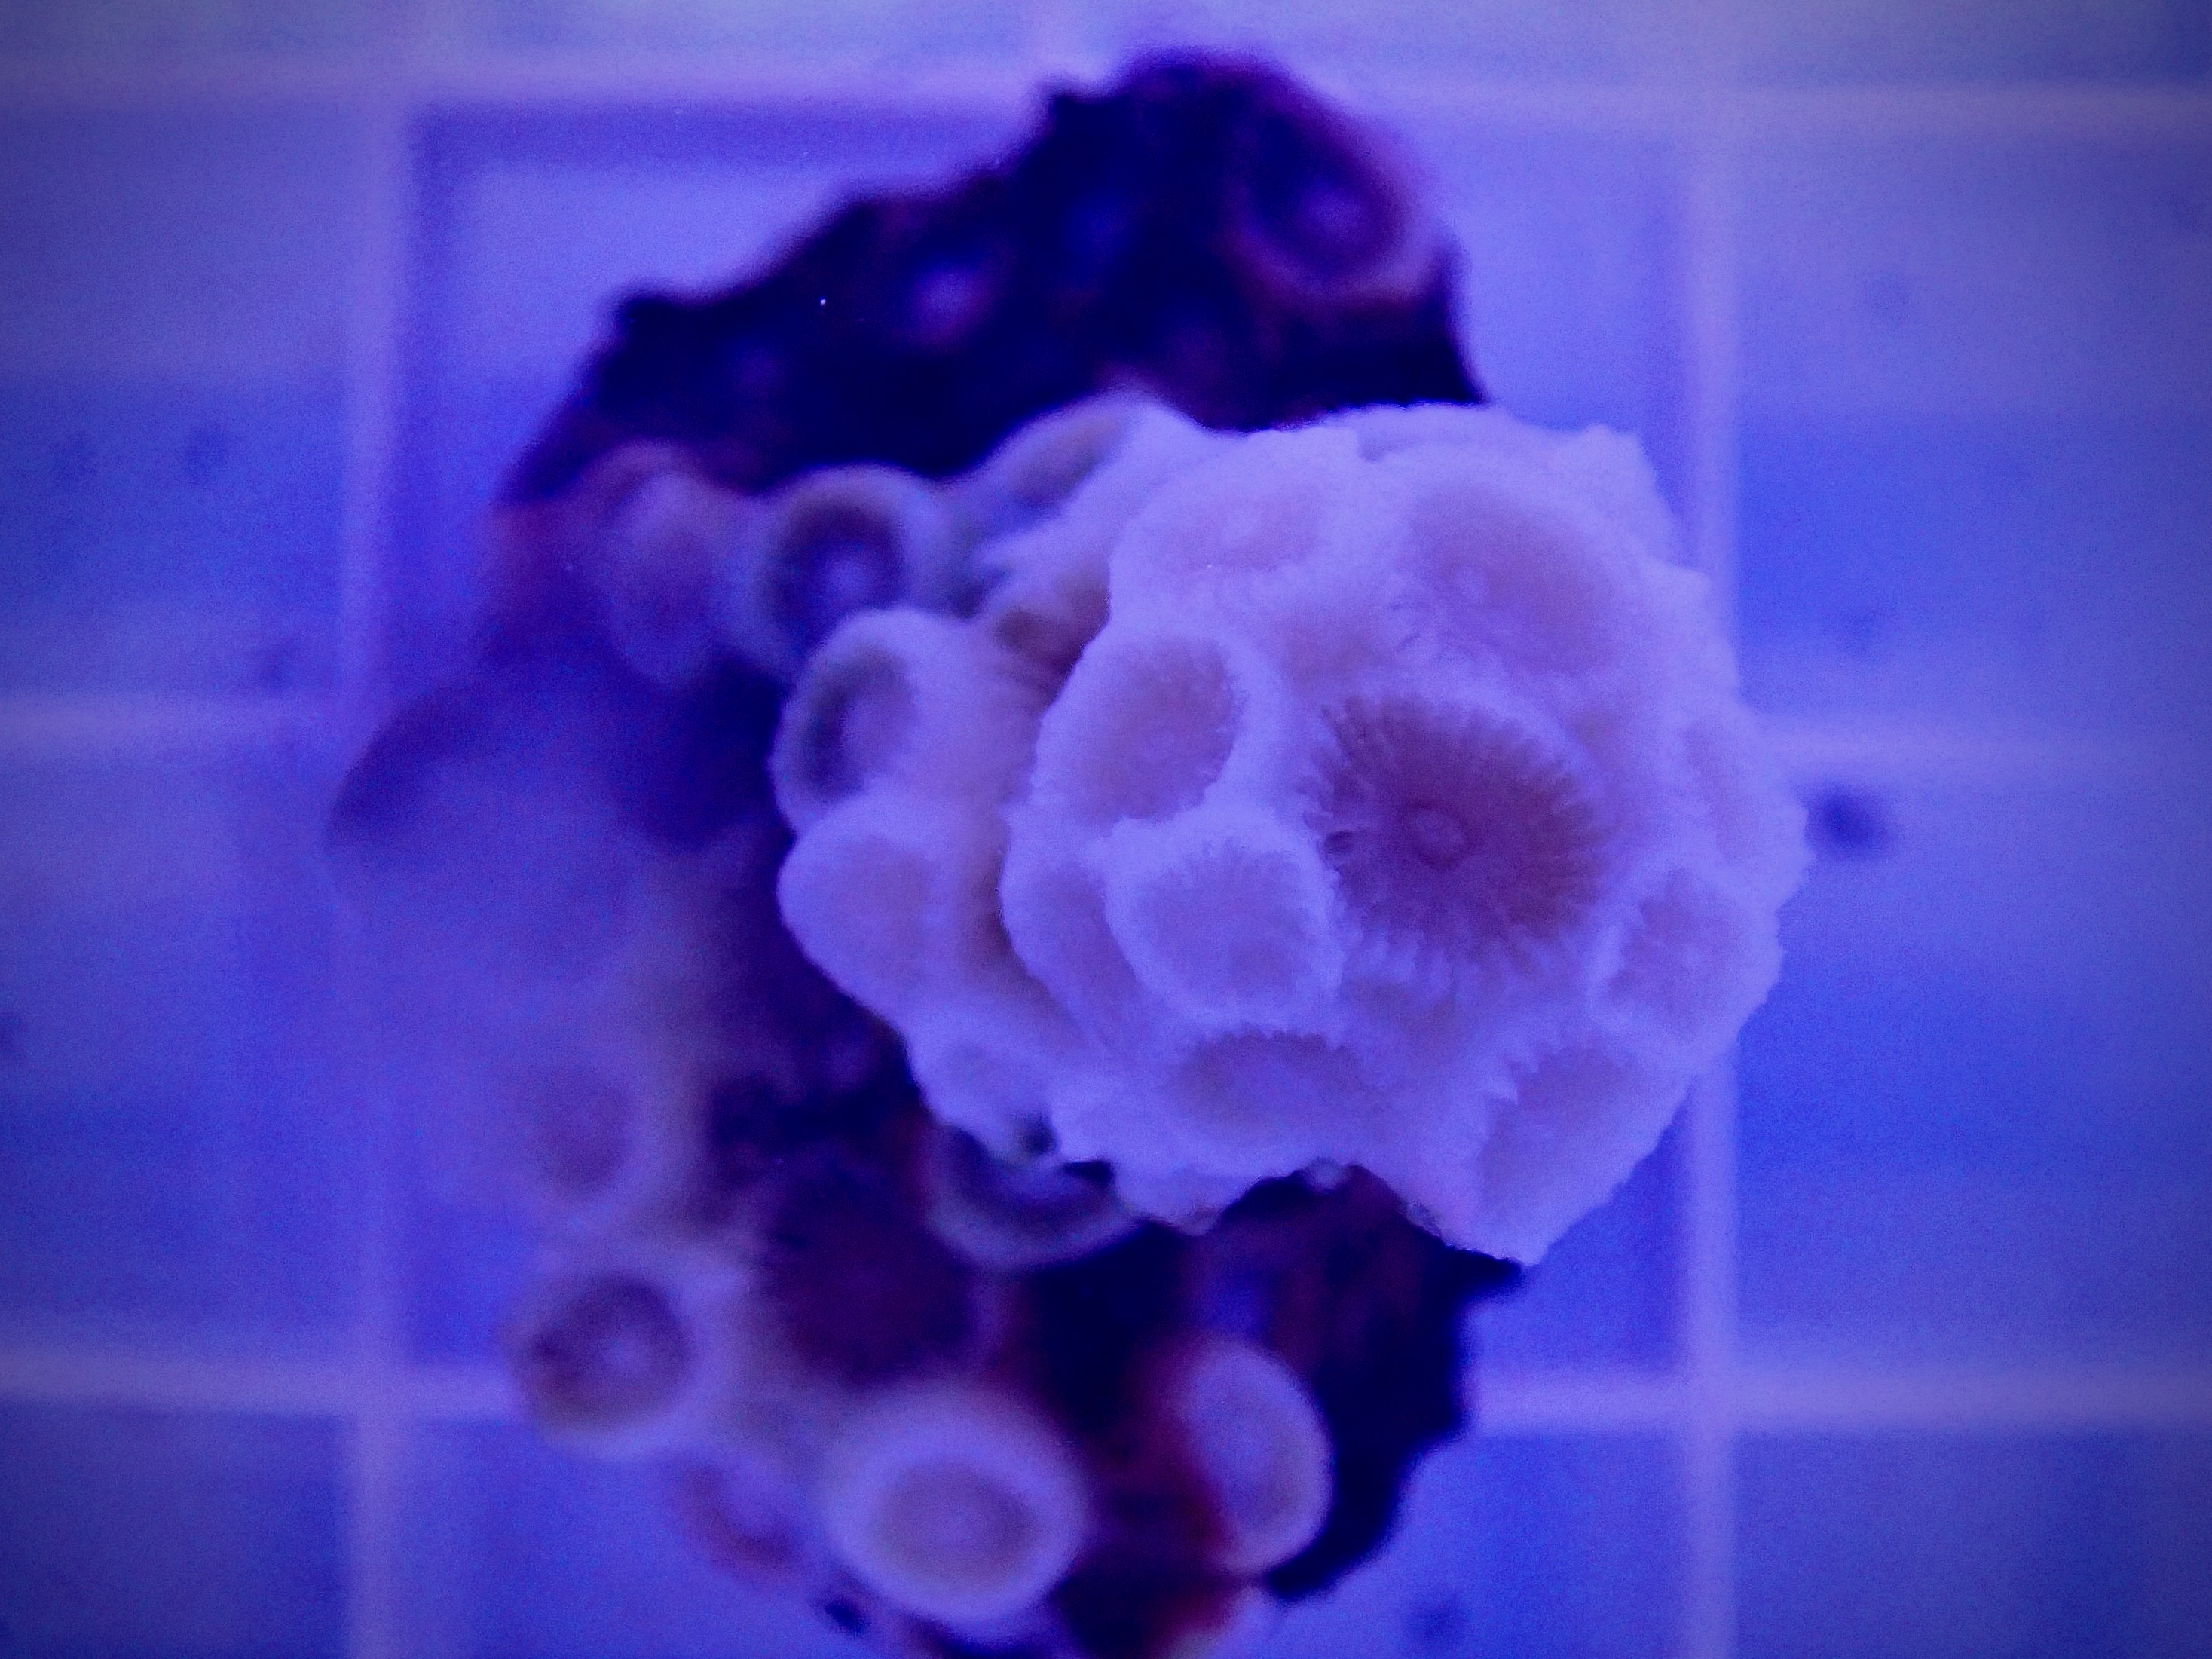 Northern star coral in quiescence in lab